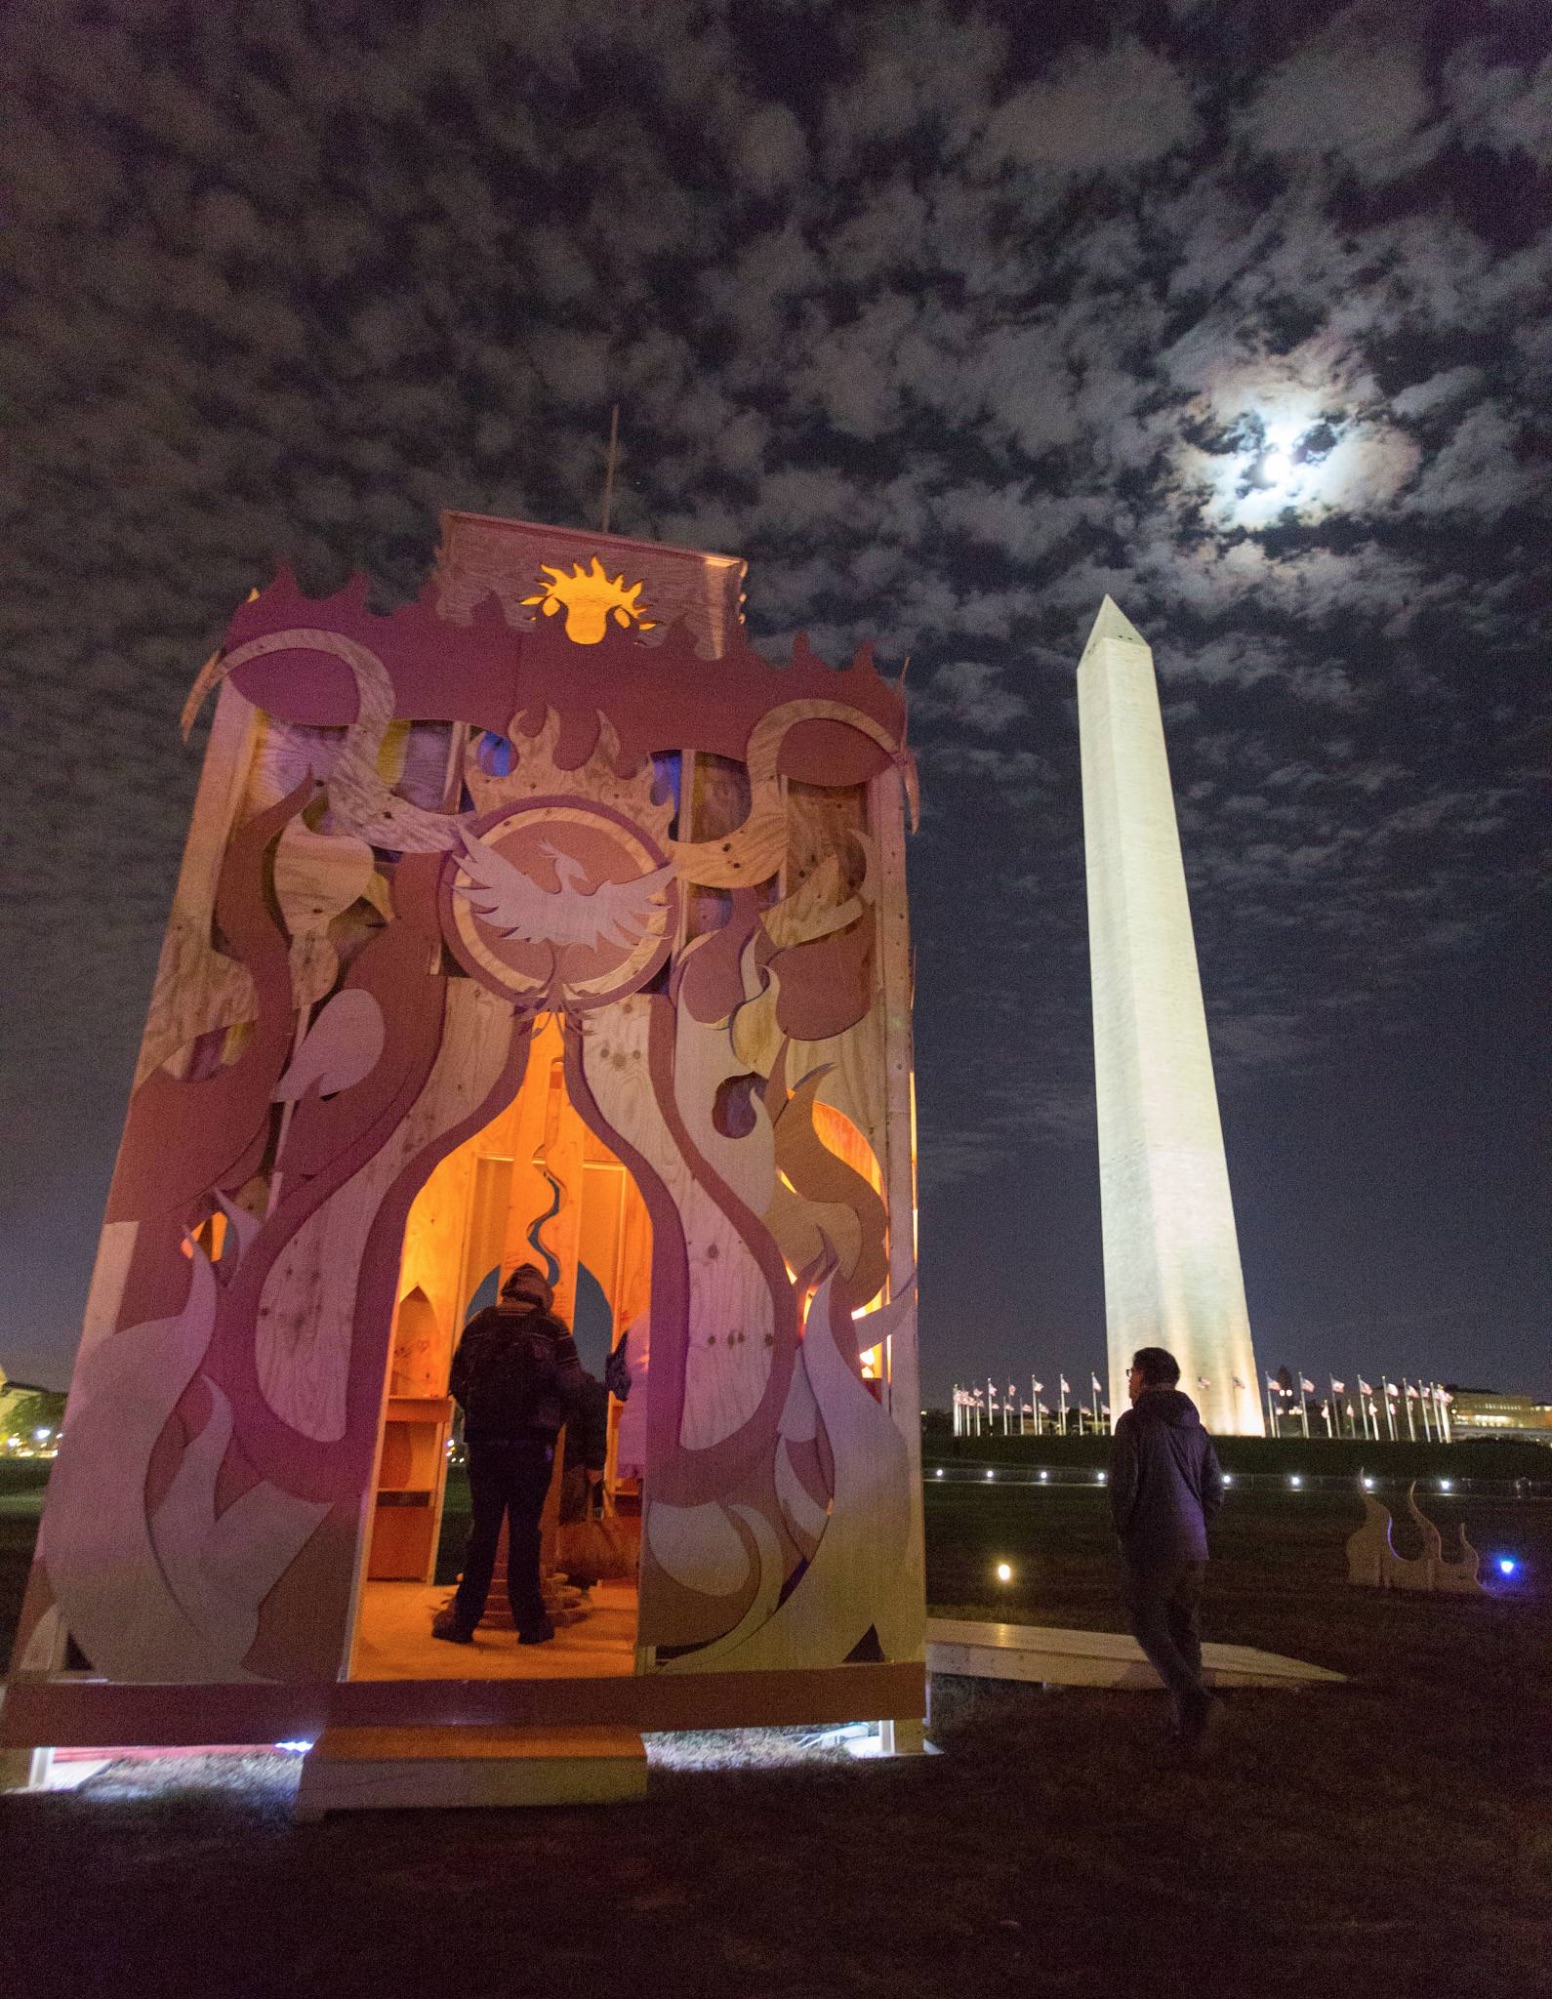 Michael Verdon also created “The Temple of Rebirth”. The 30-foot-tall structure gave us a space for personal and collective healing and will burn in a future event. (Photo by Kris Northern)